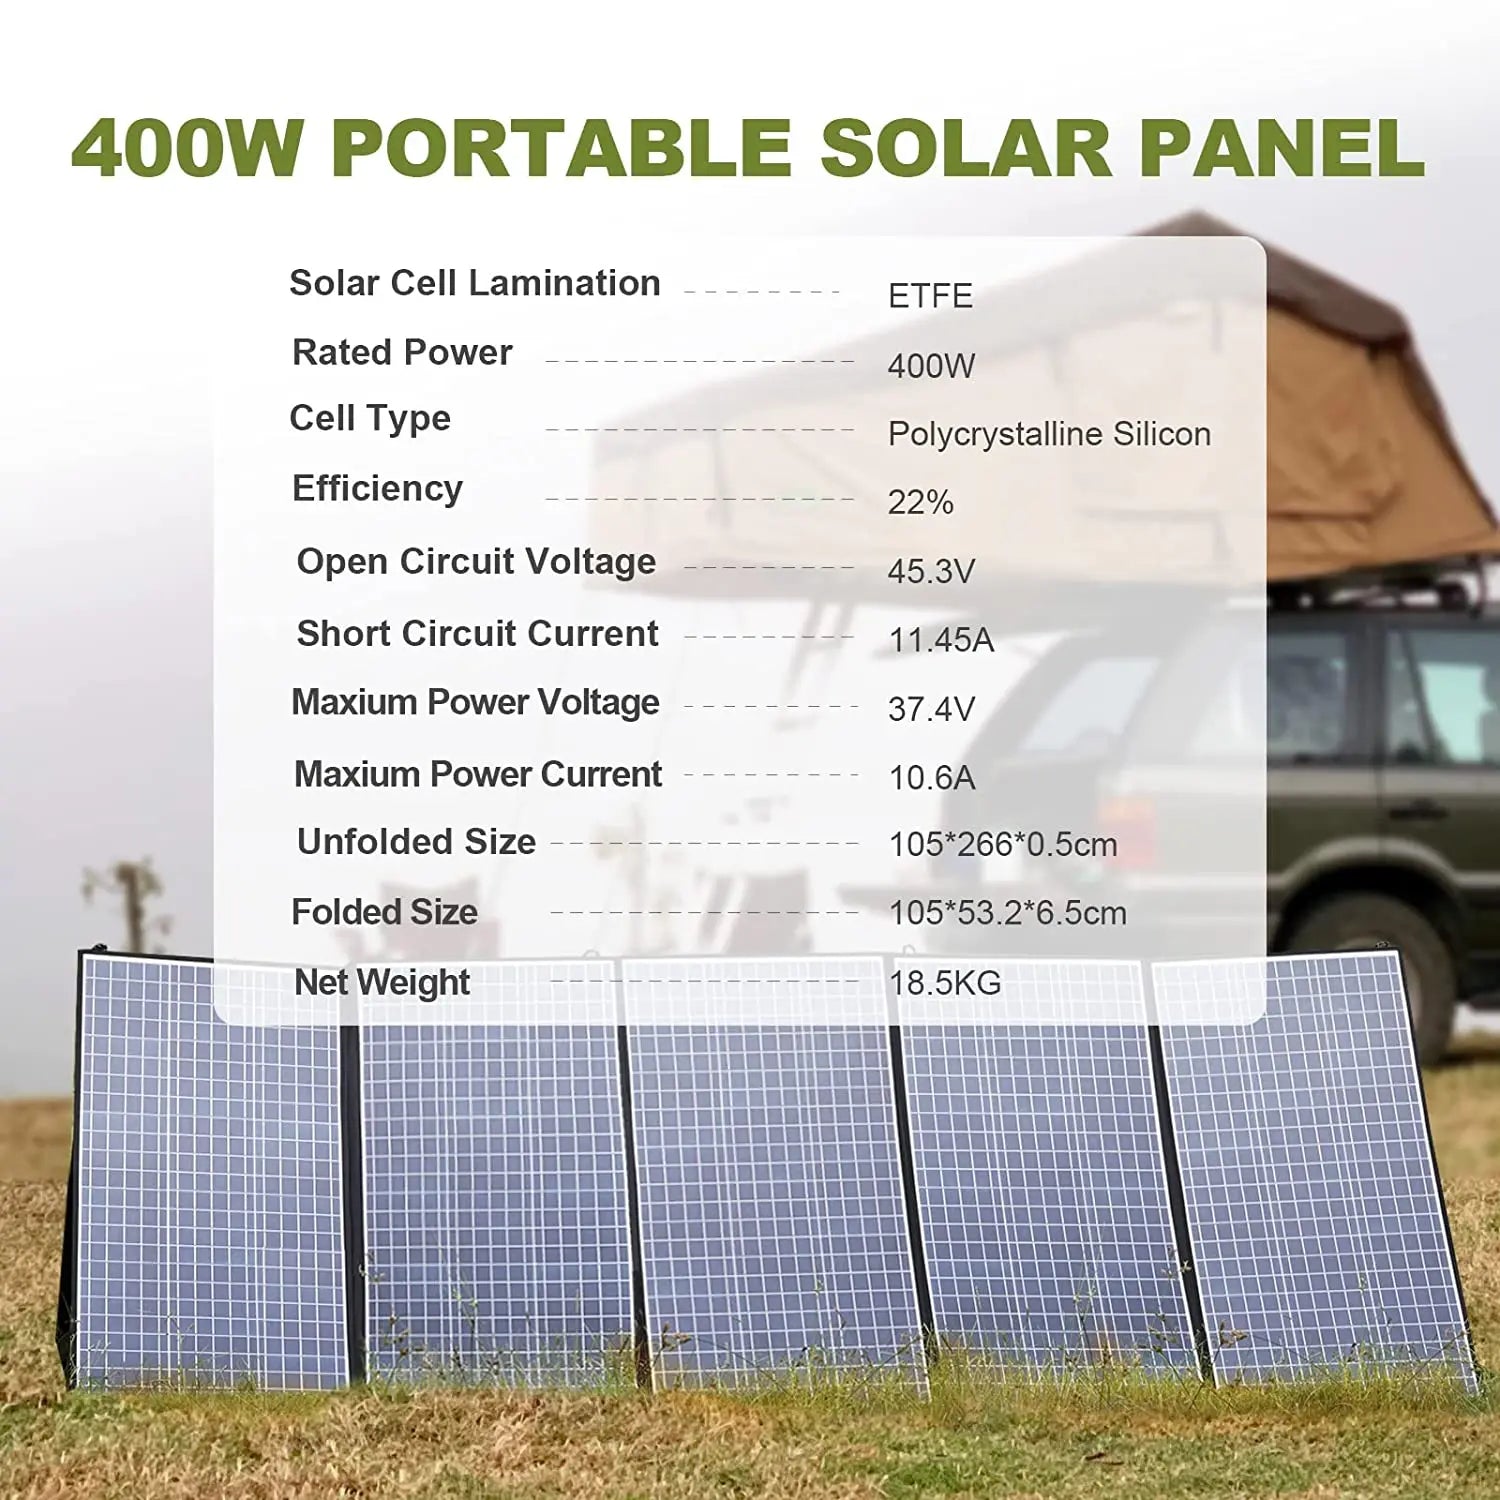 ALLPOWERS Foldable Solar Panel, Compact foldable solar panel with 400W power, 22% efficiency, and adjustable dimensions.